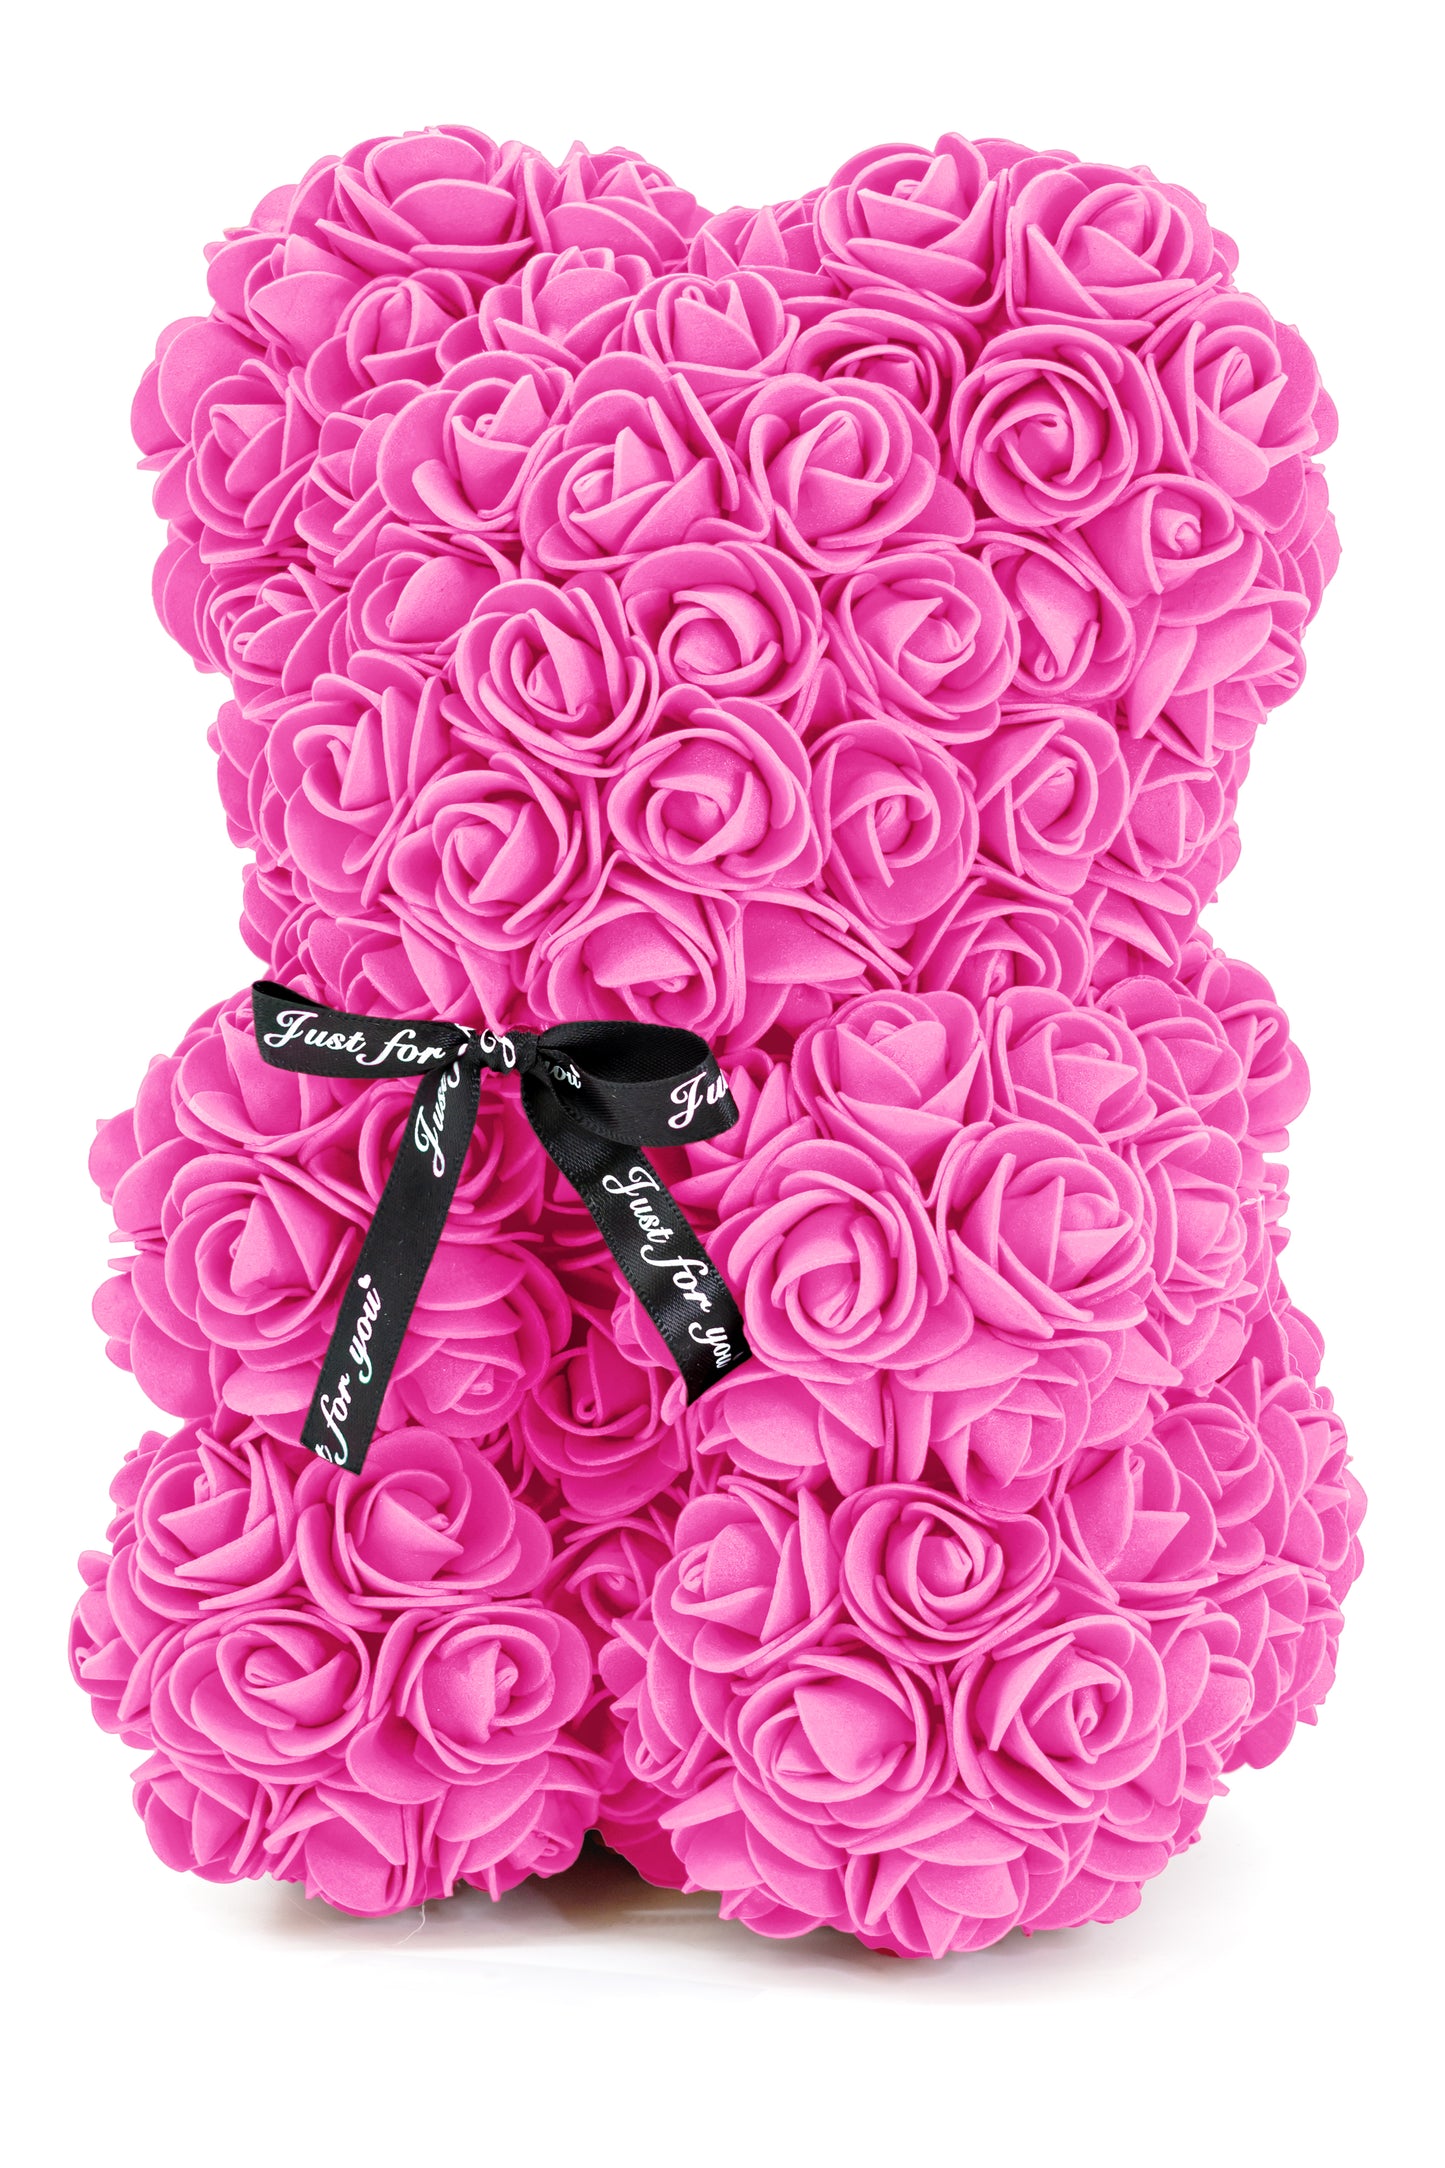 A flower bear decoration covered in pink foam shaped roses